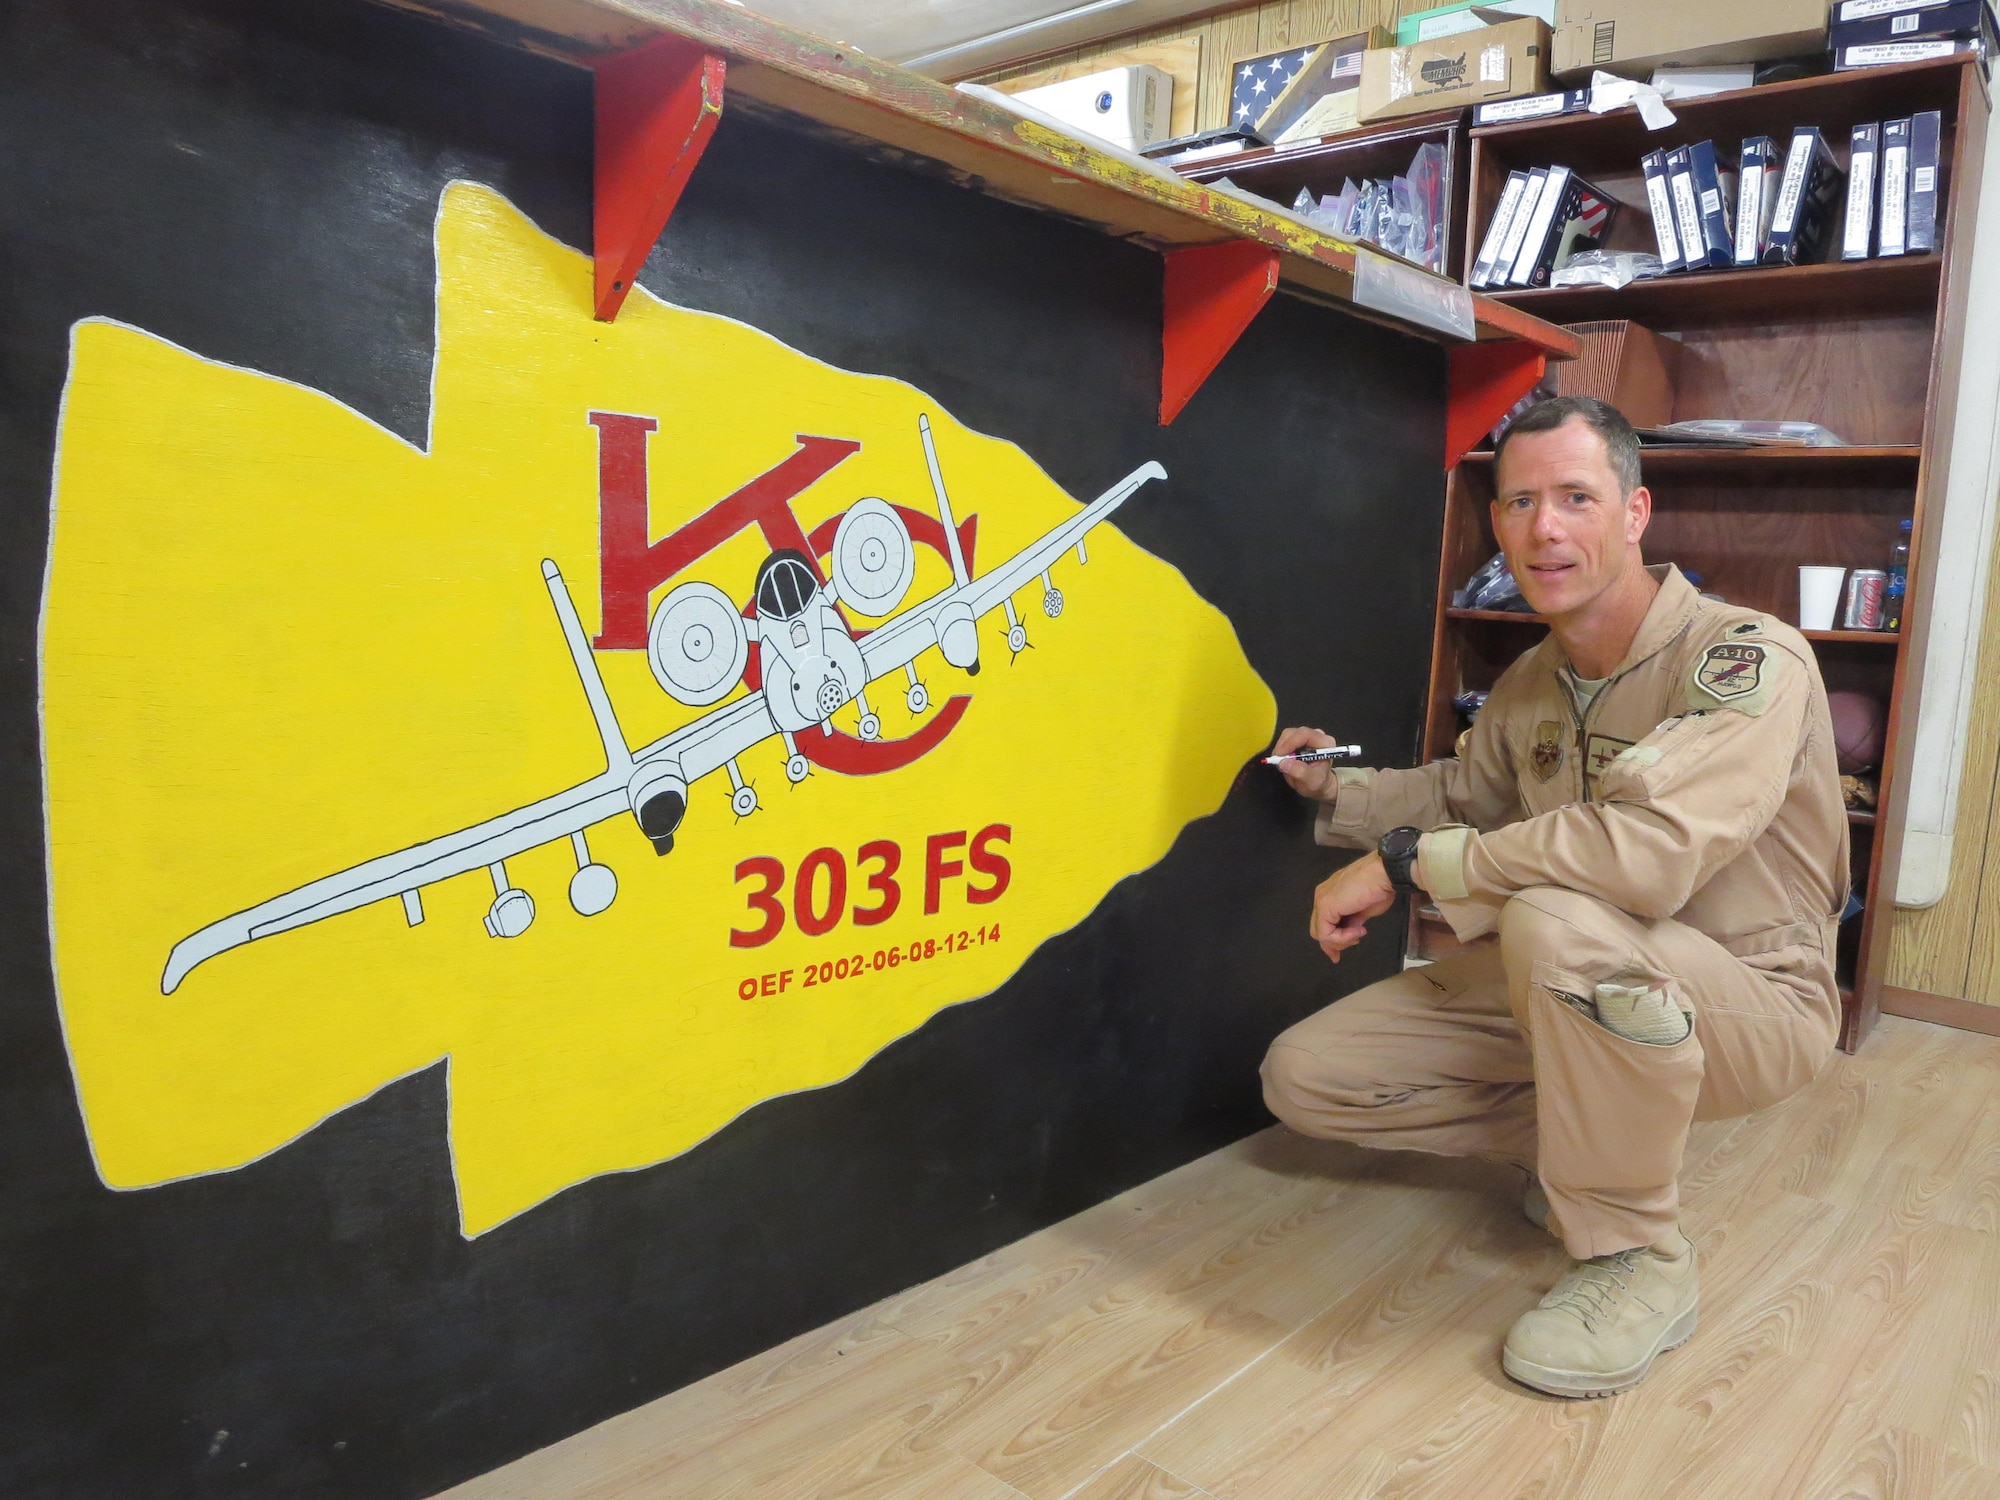 U.S. Air Force Lt. Col. John Marks smiles in front of his 303rd Fighter Squadron artwork at Bagram Air Base, Afghanistan, during Operation Enduring Freedom in 2014. The 303rd Fighter Squadron is attached to the 442d Fighter Wing, a Reserve wing located at Whiteman Air Force Base, Missouri. (Courtesy photo provide by Lt. Col. Marks)